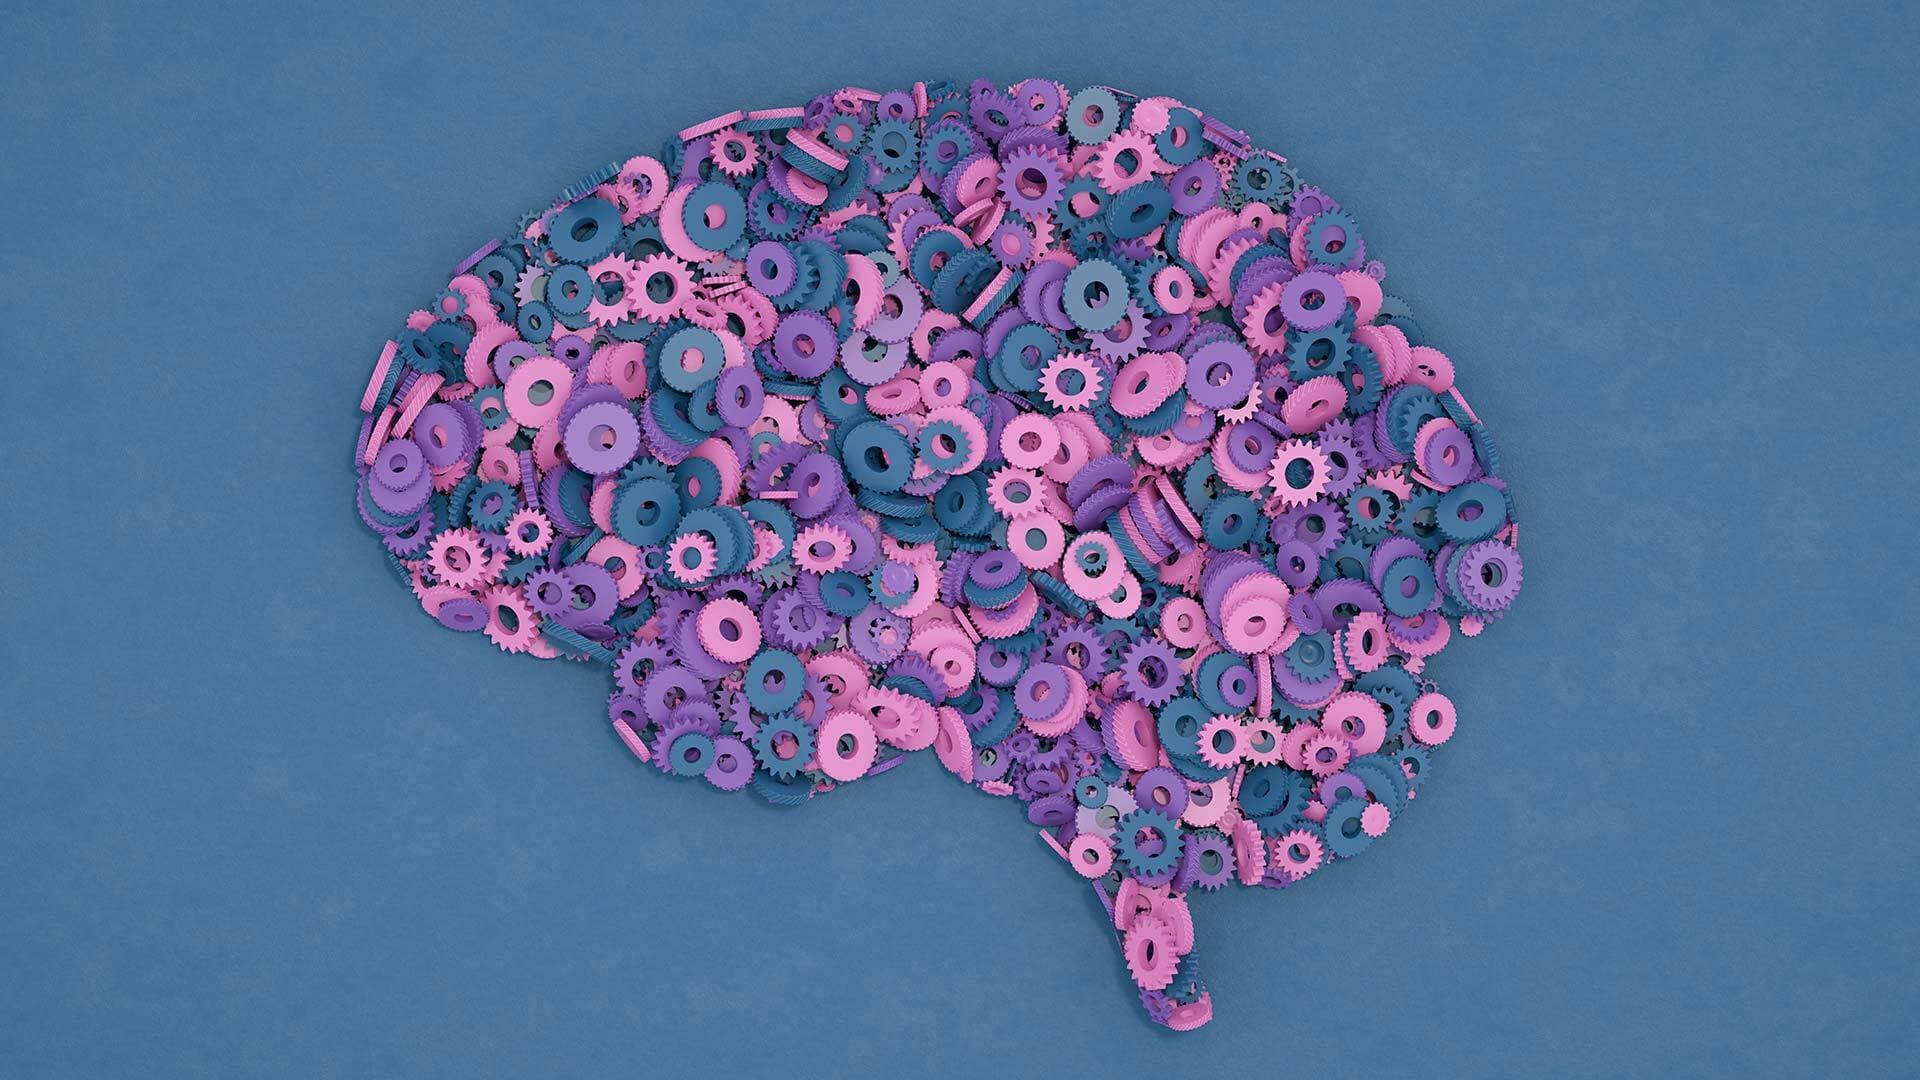 pink and purple brain composed of gear